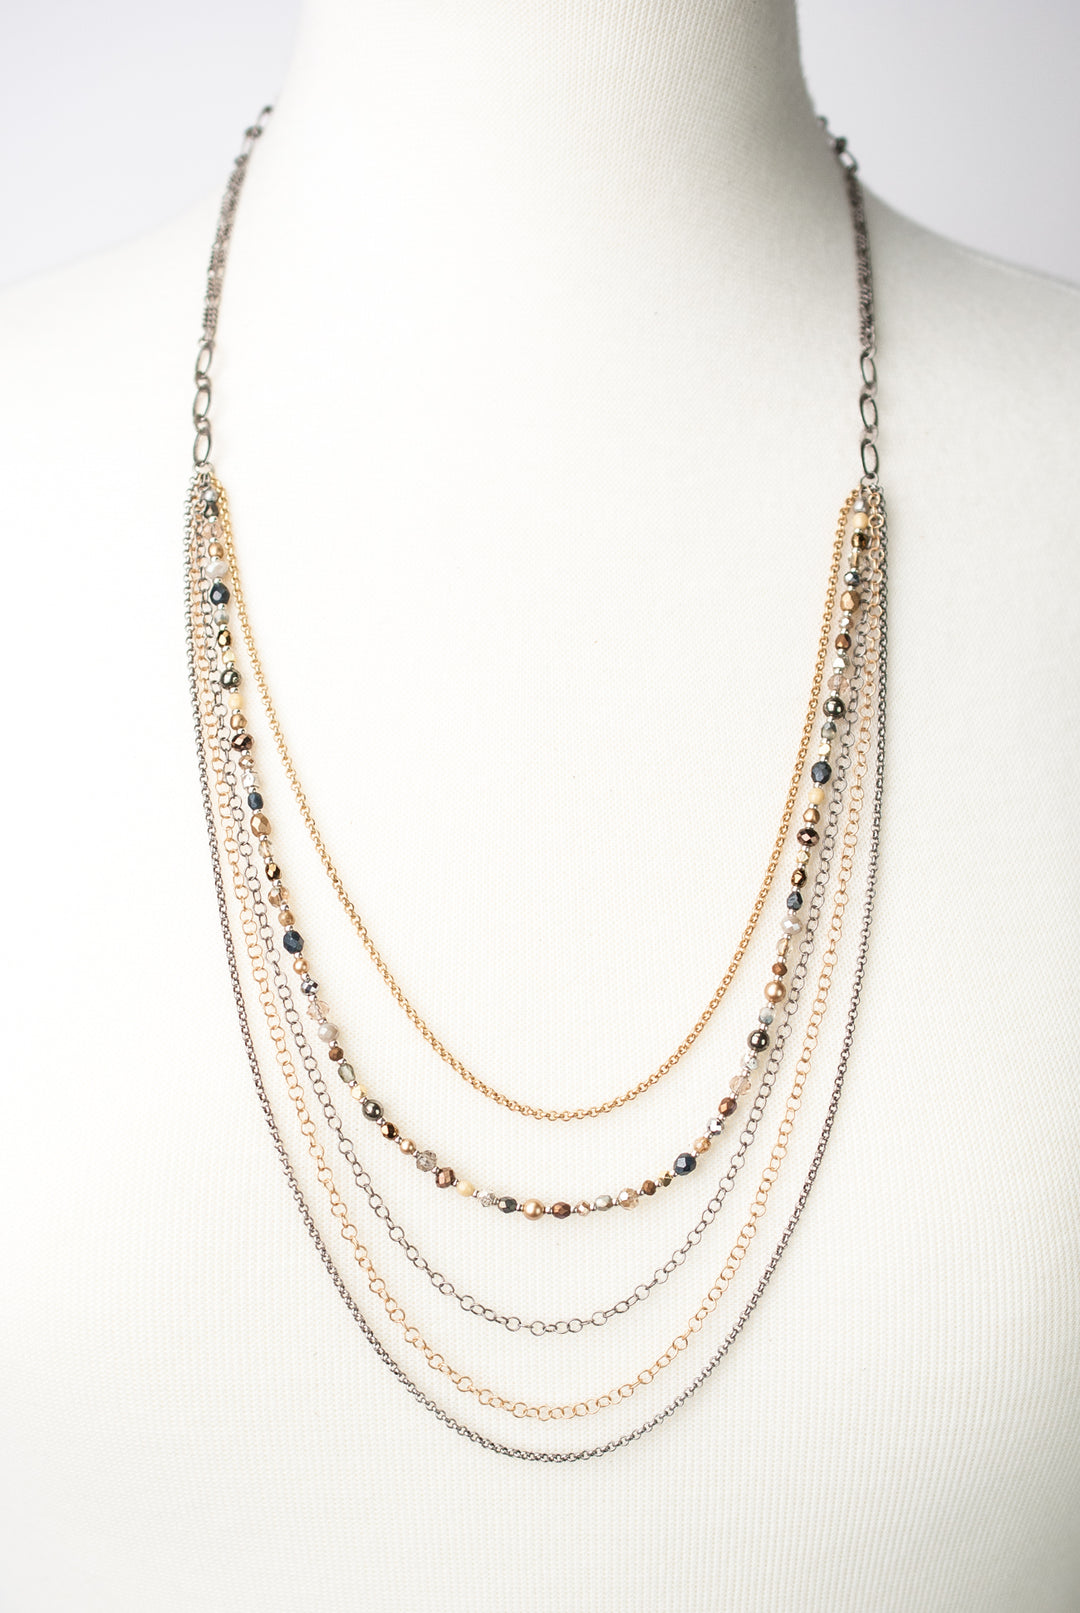 Silver & Gold 26.5-28.5" Fine Multistrand Necklace (limited)